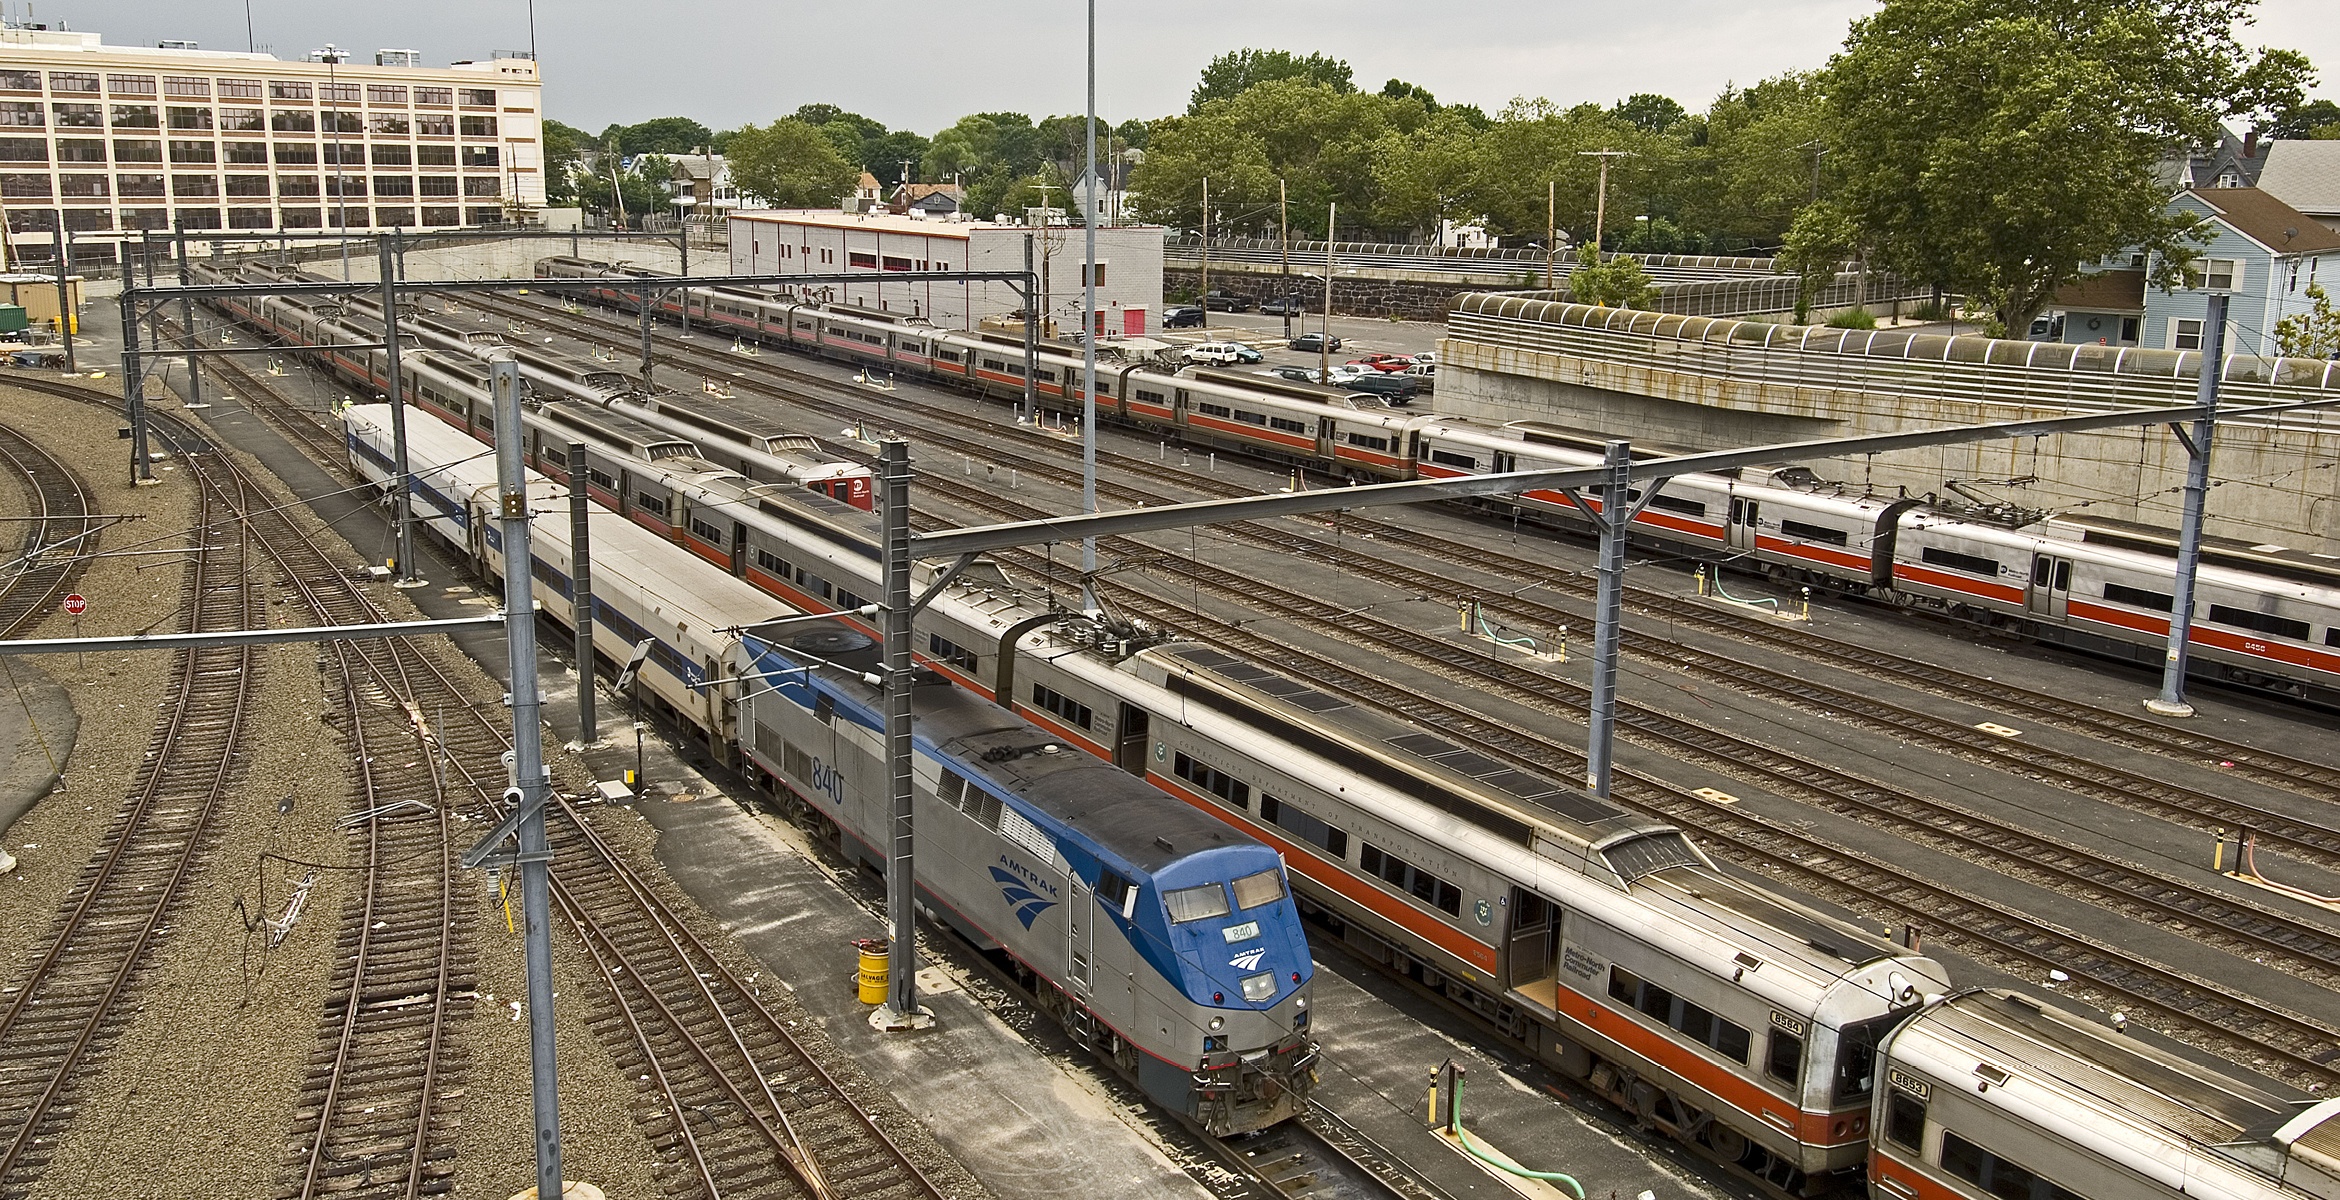 View of New Haven Yard with different types of trains in the image. All are examples of older train models.